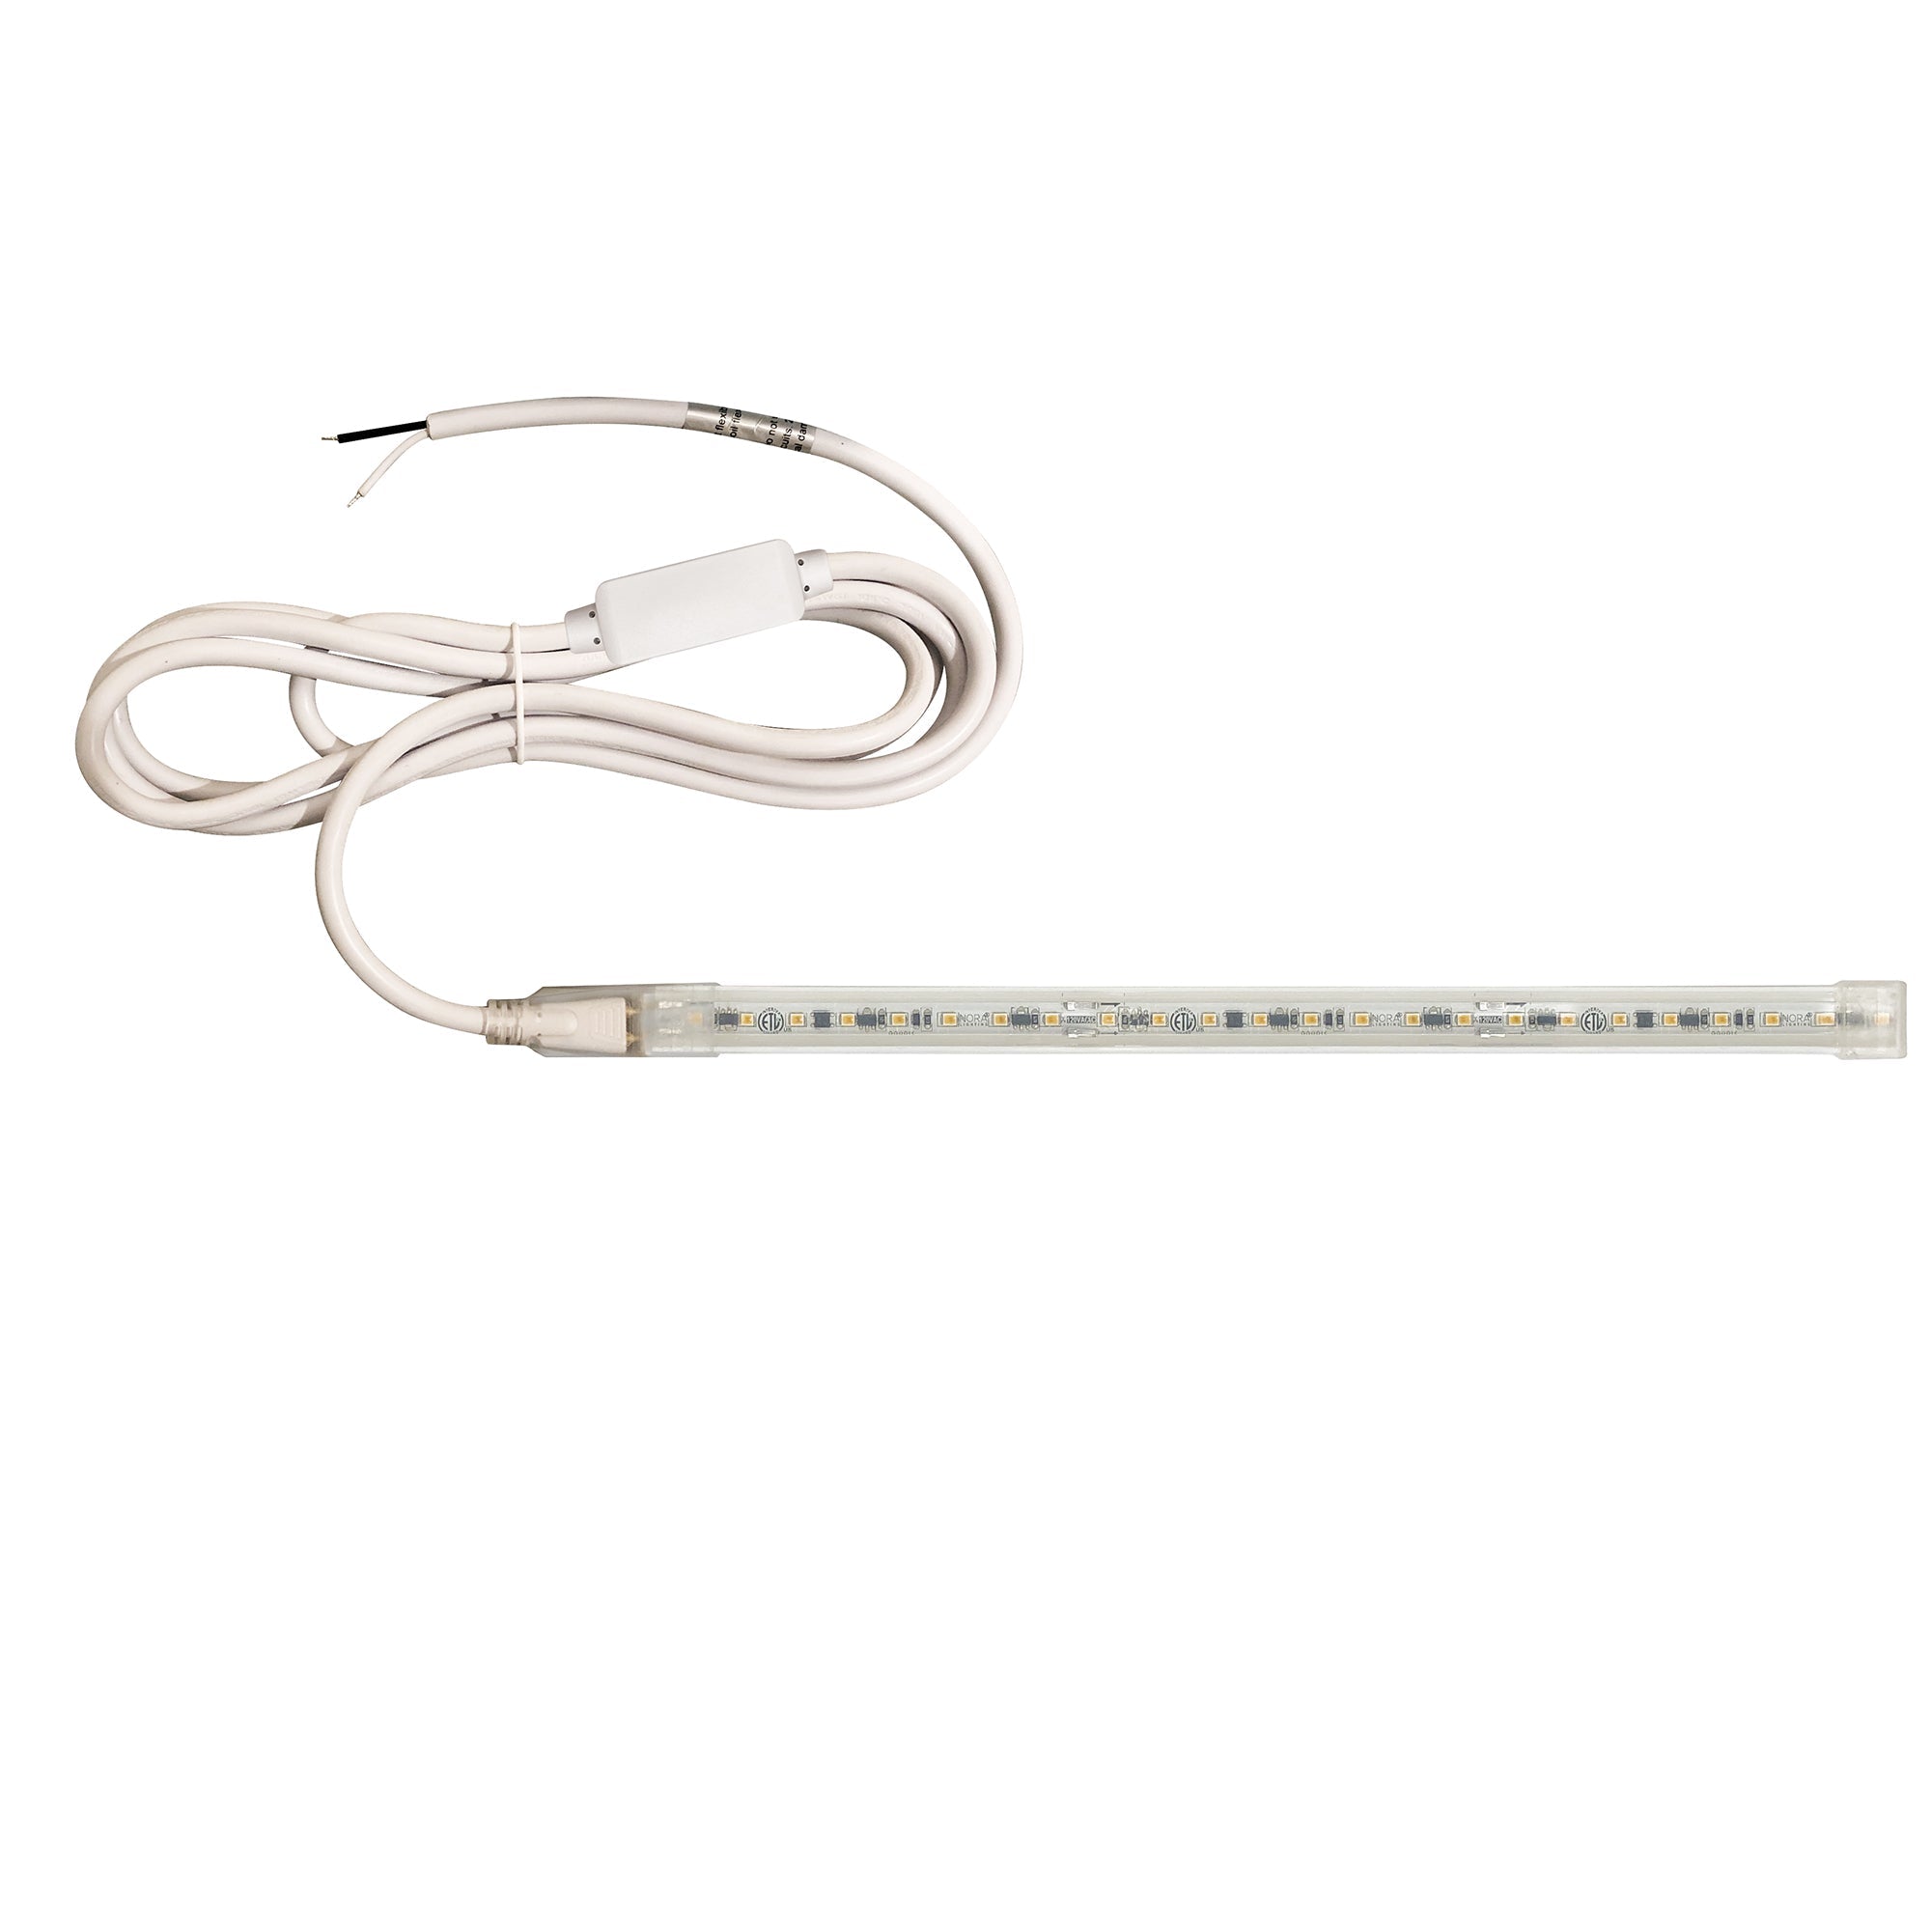 Nora Lighting NUTP13-W70-8-12-930/HWSP - Accent / Undercabinet - Custom Cut 70-ft, 8-in 120V Continuous LED Tape Light, 330lm / 3.6W per foot, 3000K, w/ Mounting Clips and 8' Hardwired Power Cord w/ Surge Protector